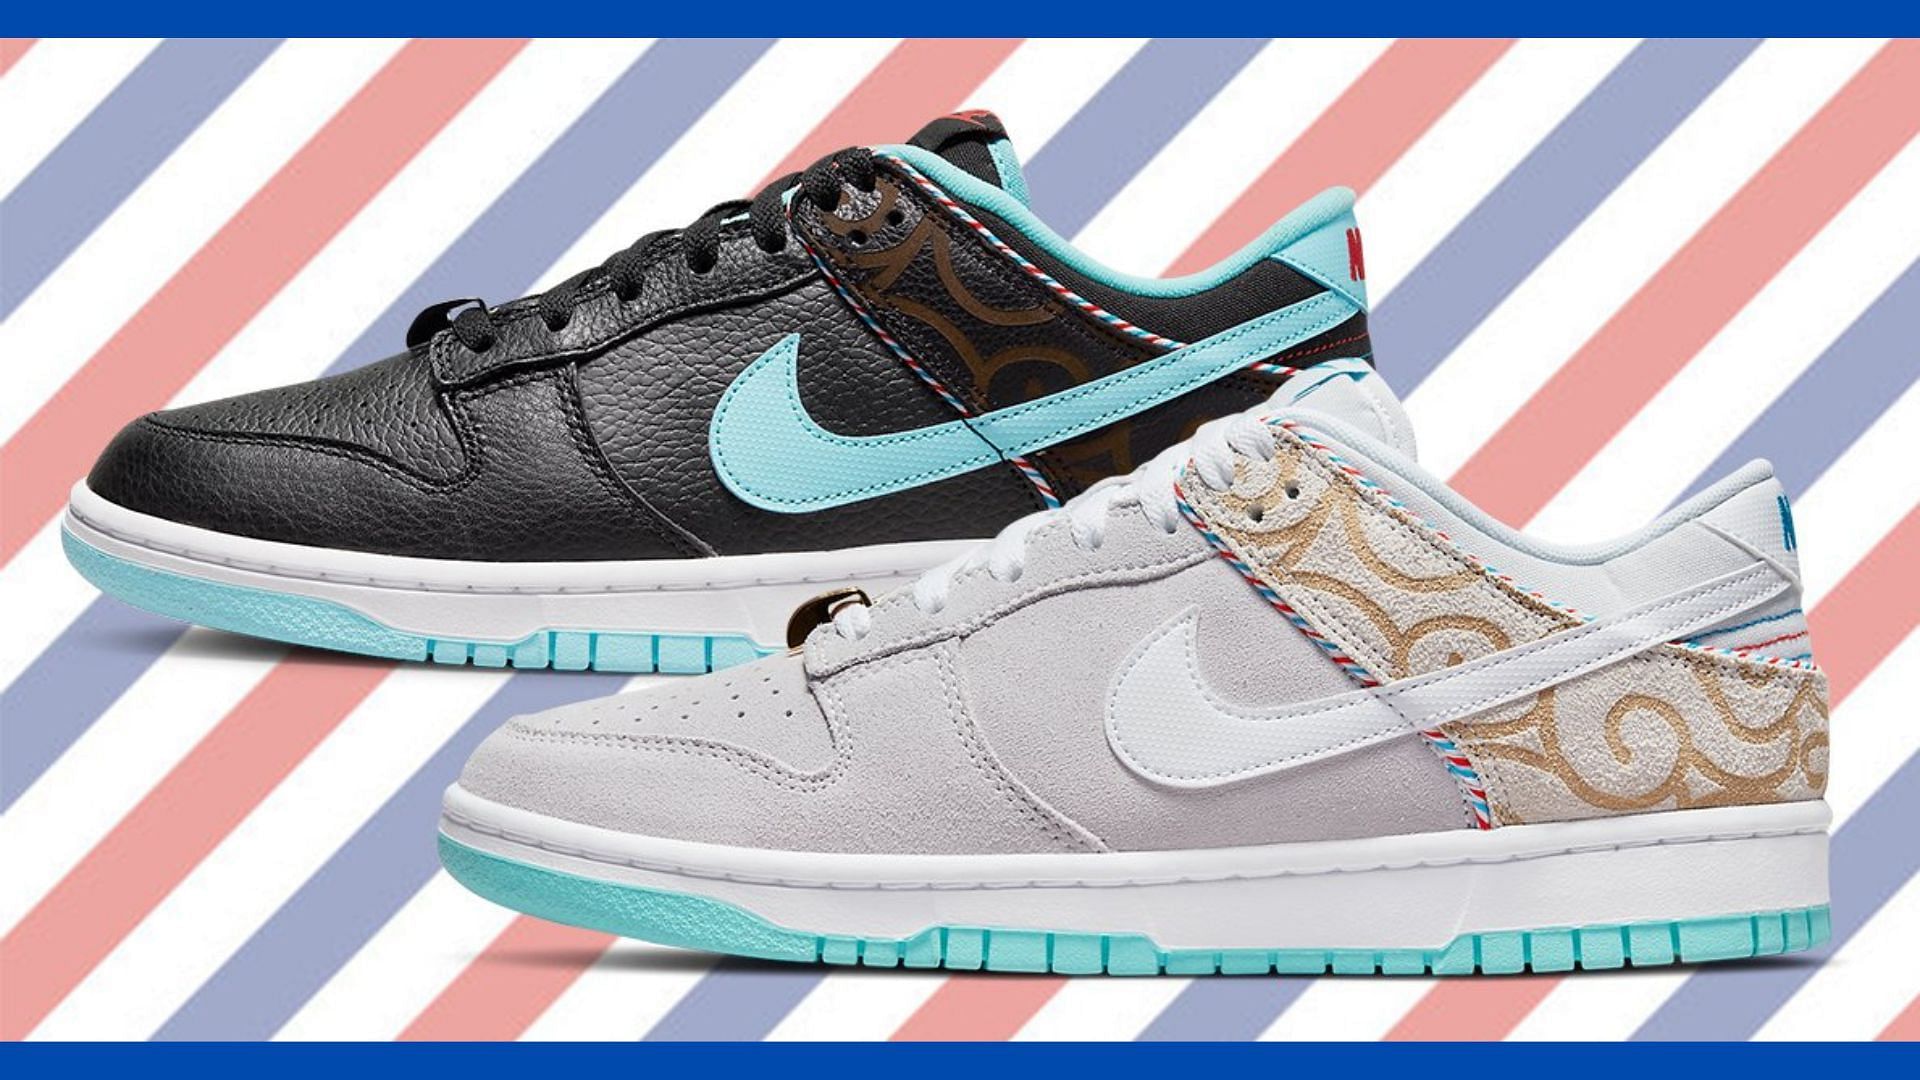 Nike Dunk Low Barbershop will be dropped in two colorways (Image via Twitter/@modernnotoriety)